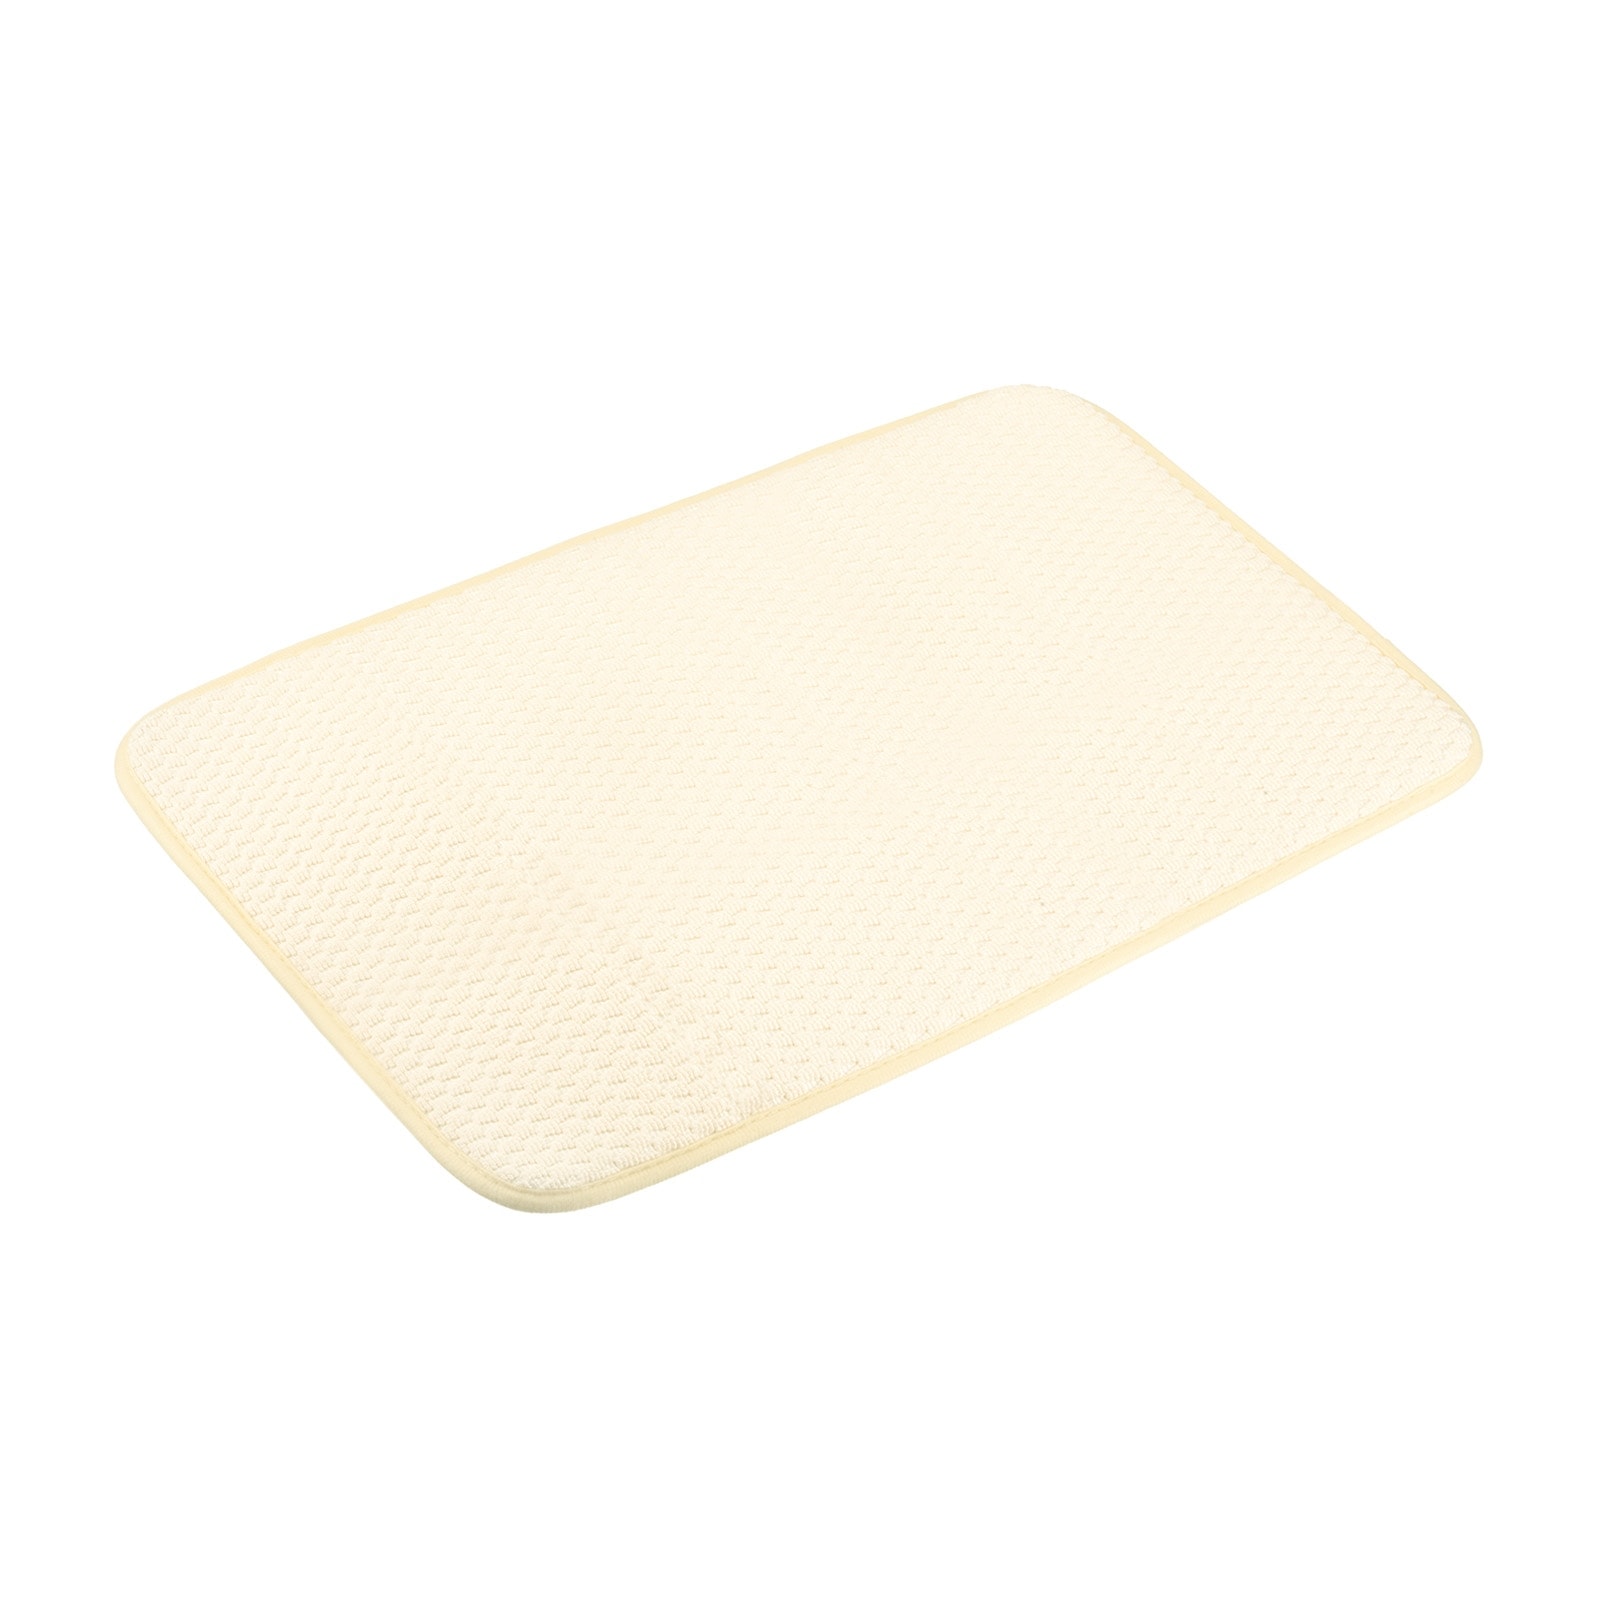 This On-Sale Microfiber Dish Mat Protects Countertops from Water